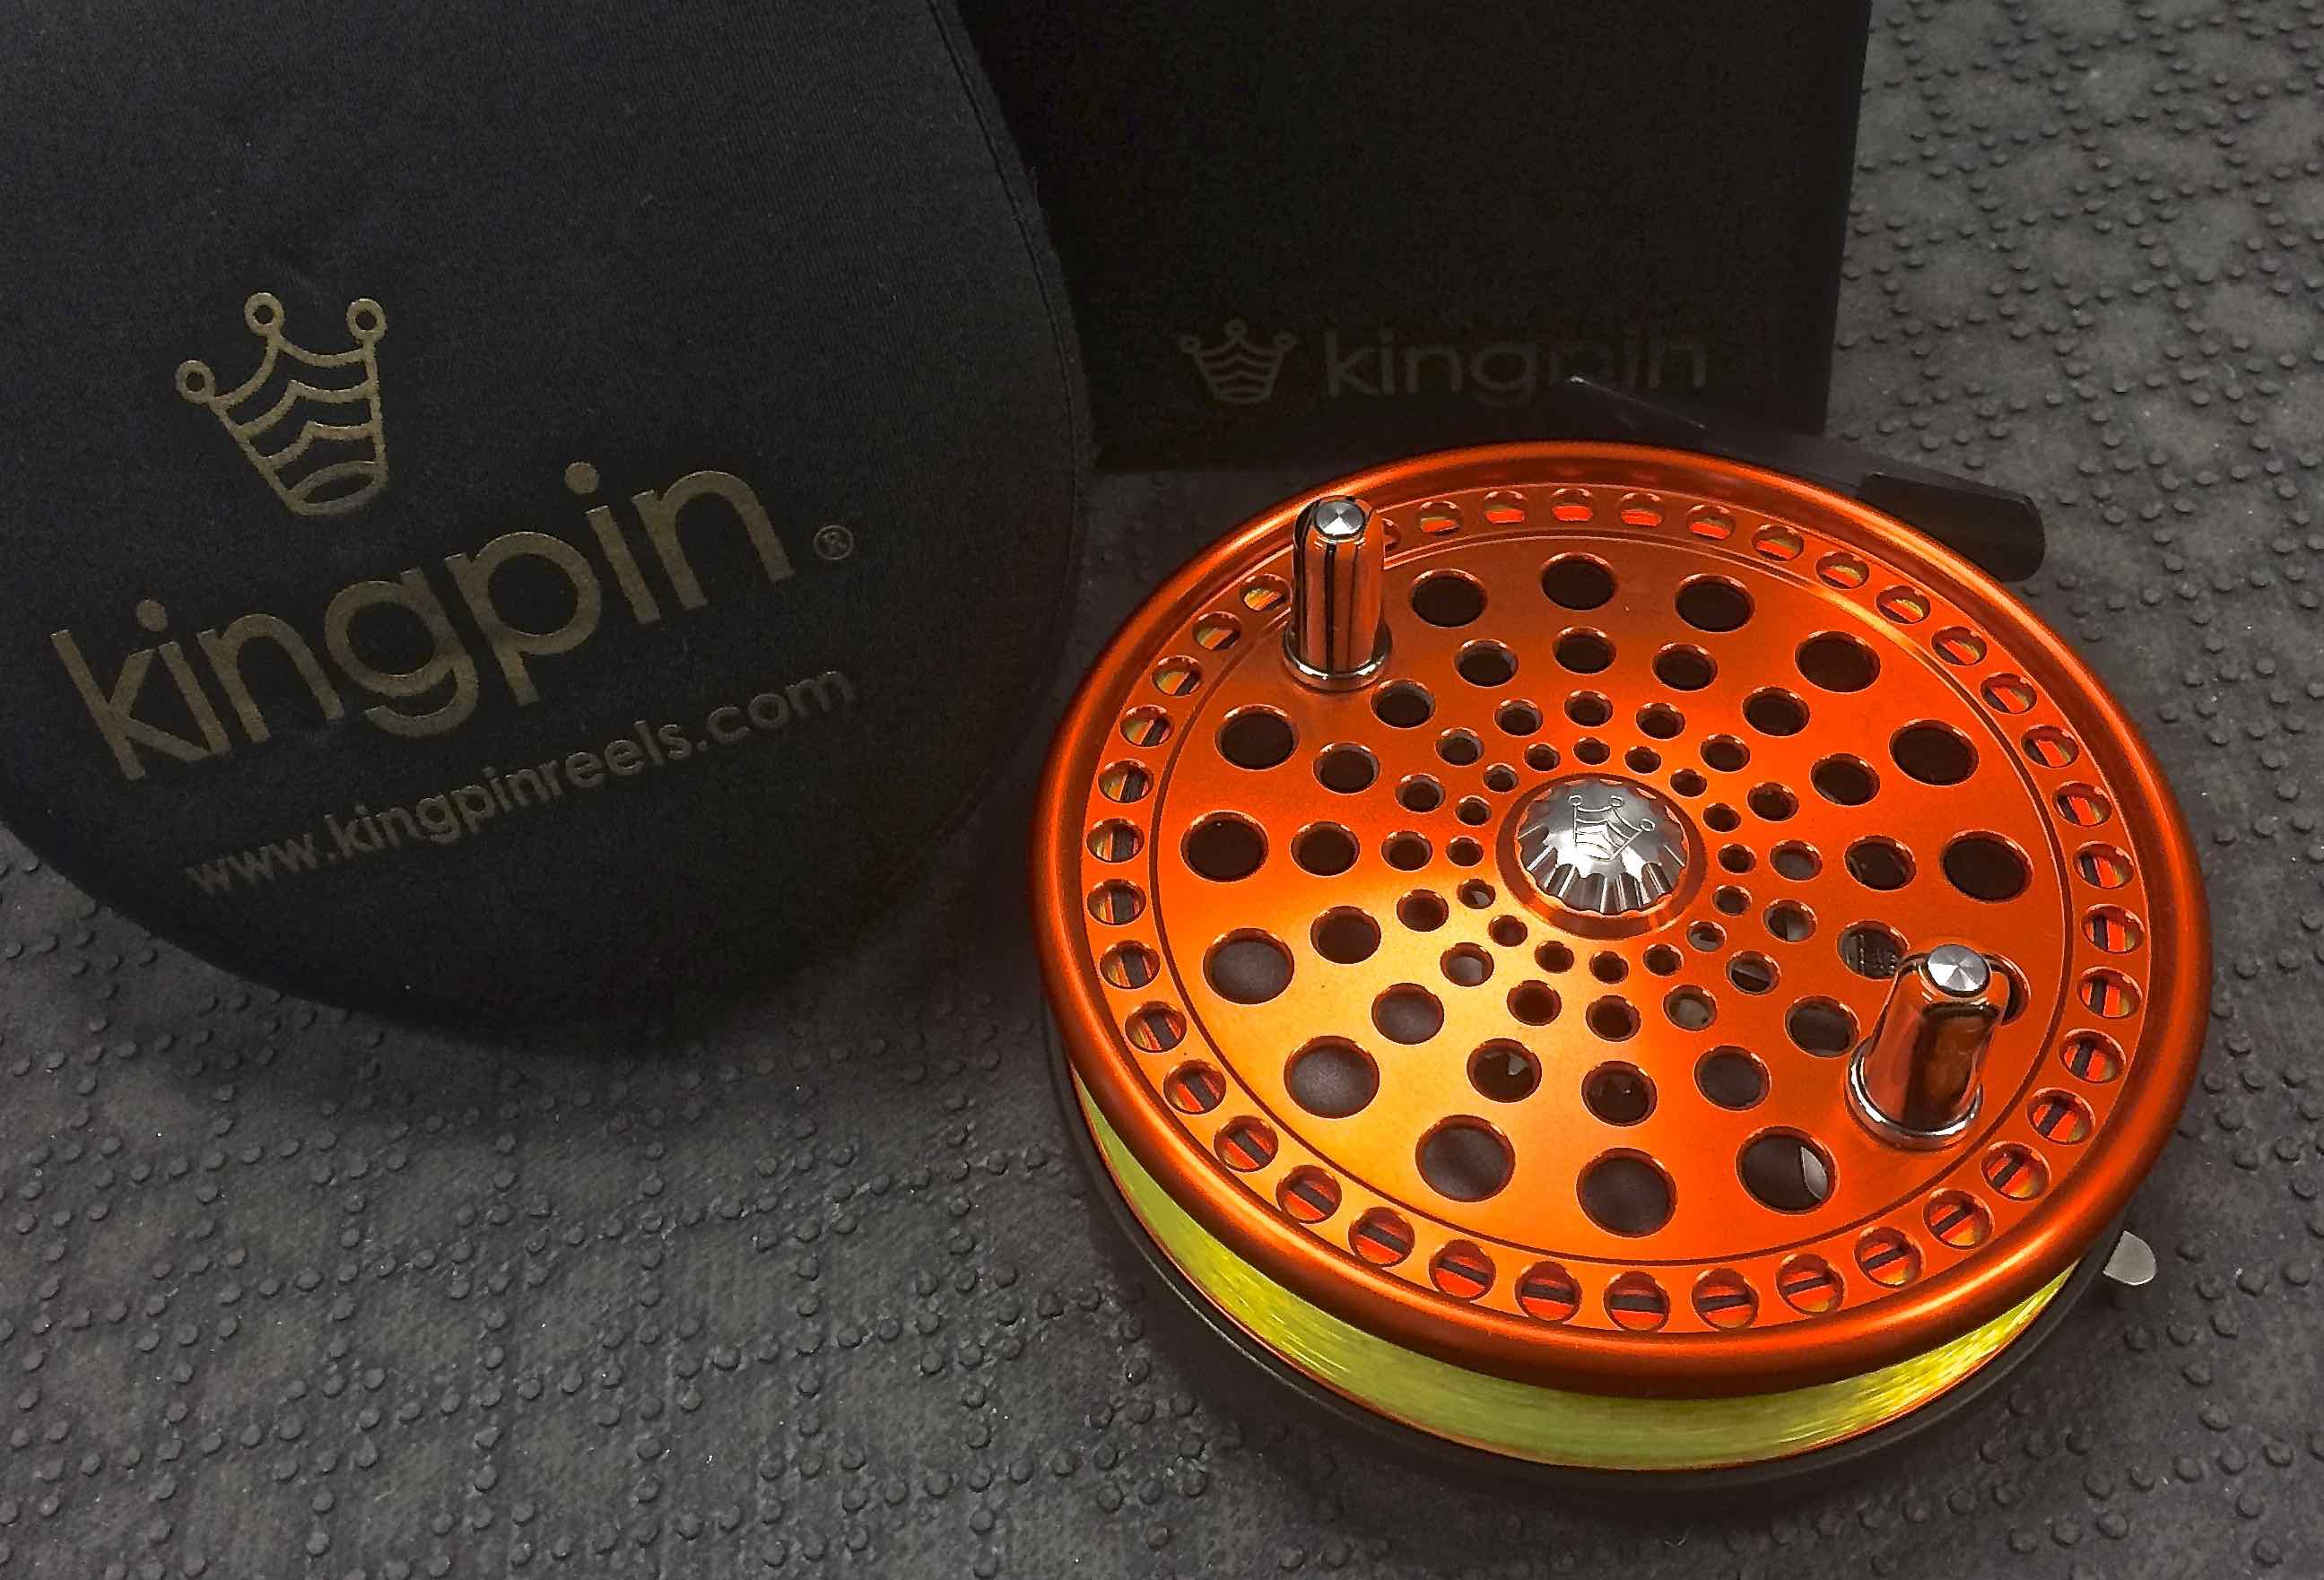 SOLD – Kingpin Imperial Burnt Orange Centerpin Float Reel with